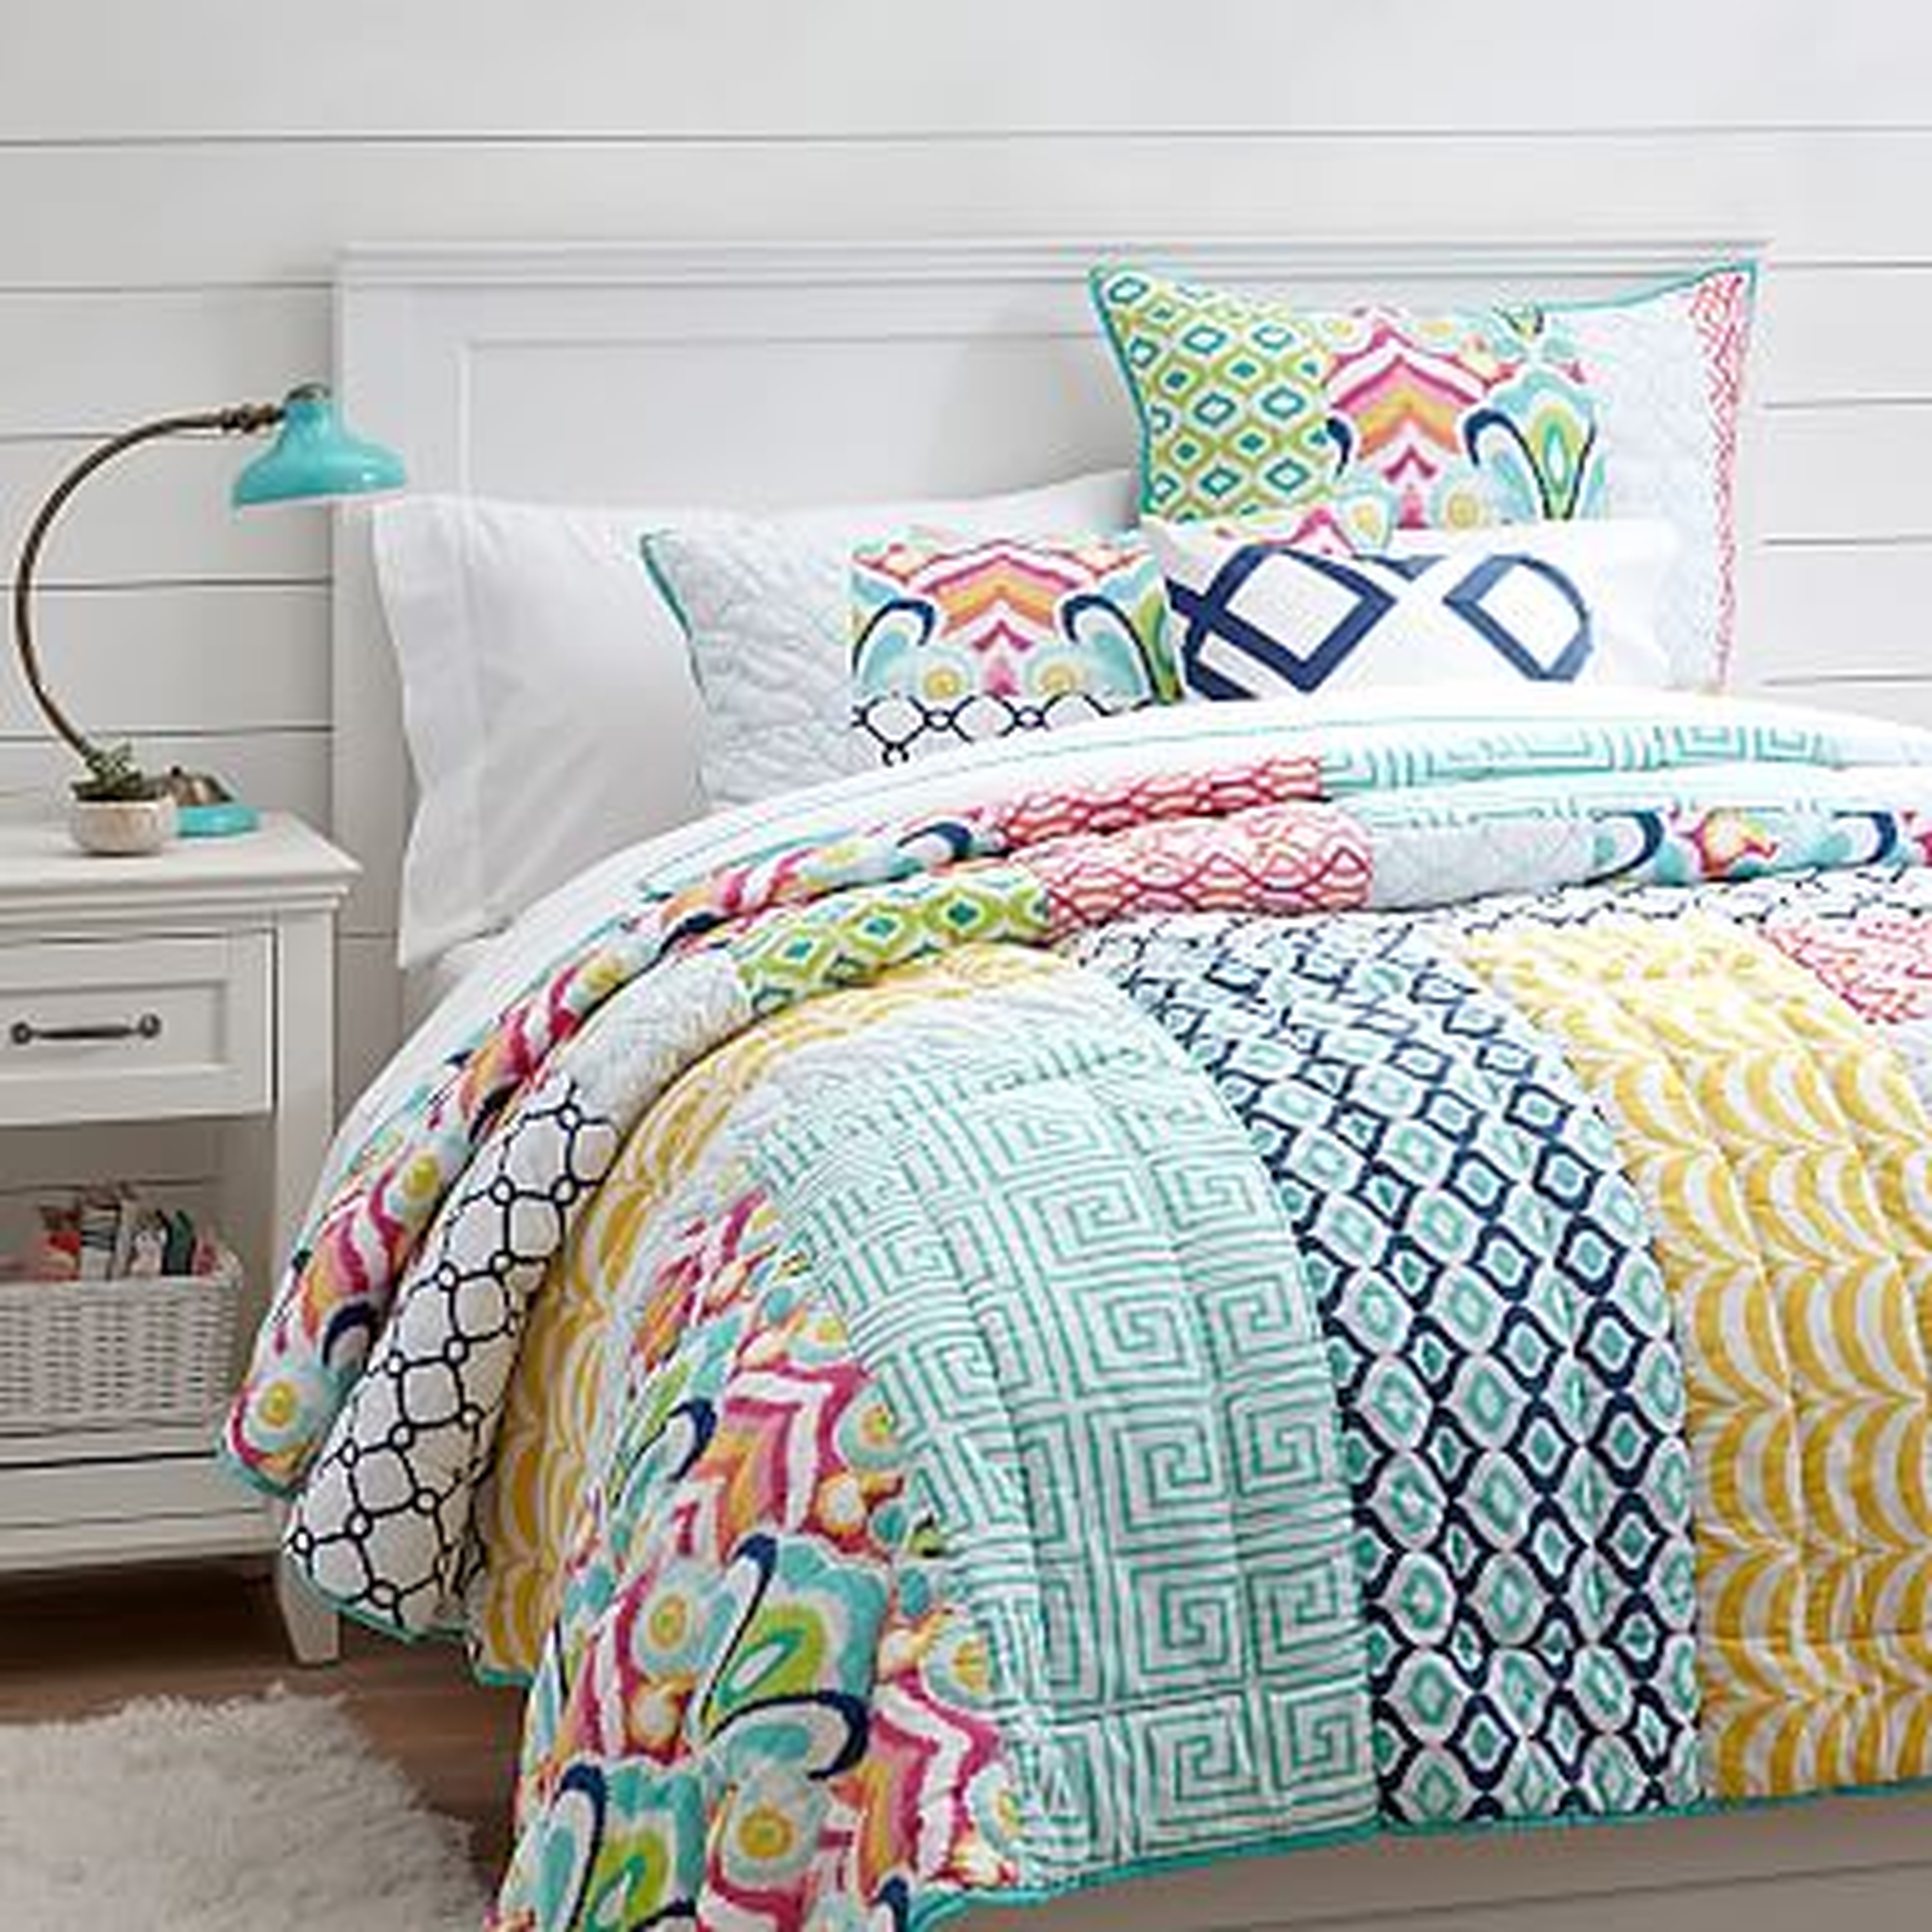 Palm Springs Patchwork Quilt, Multi, Twin - Pottery Barn Teen